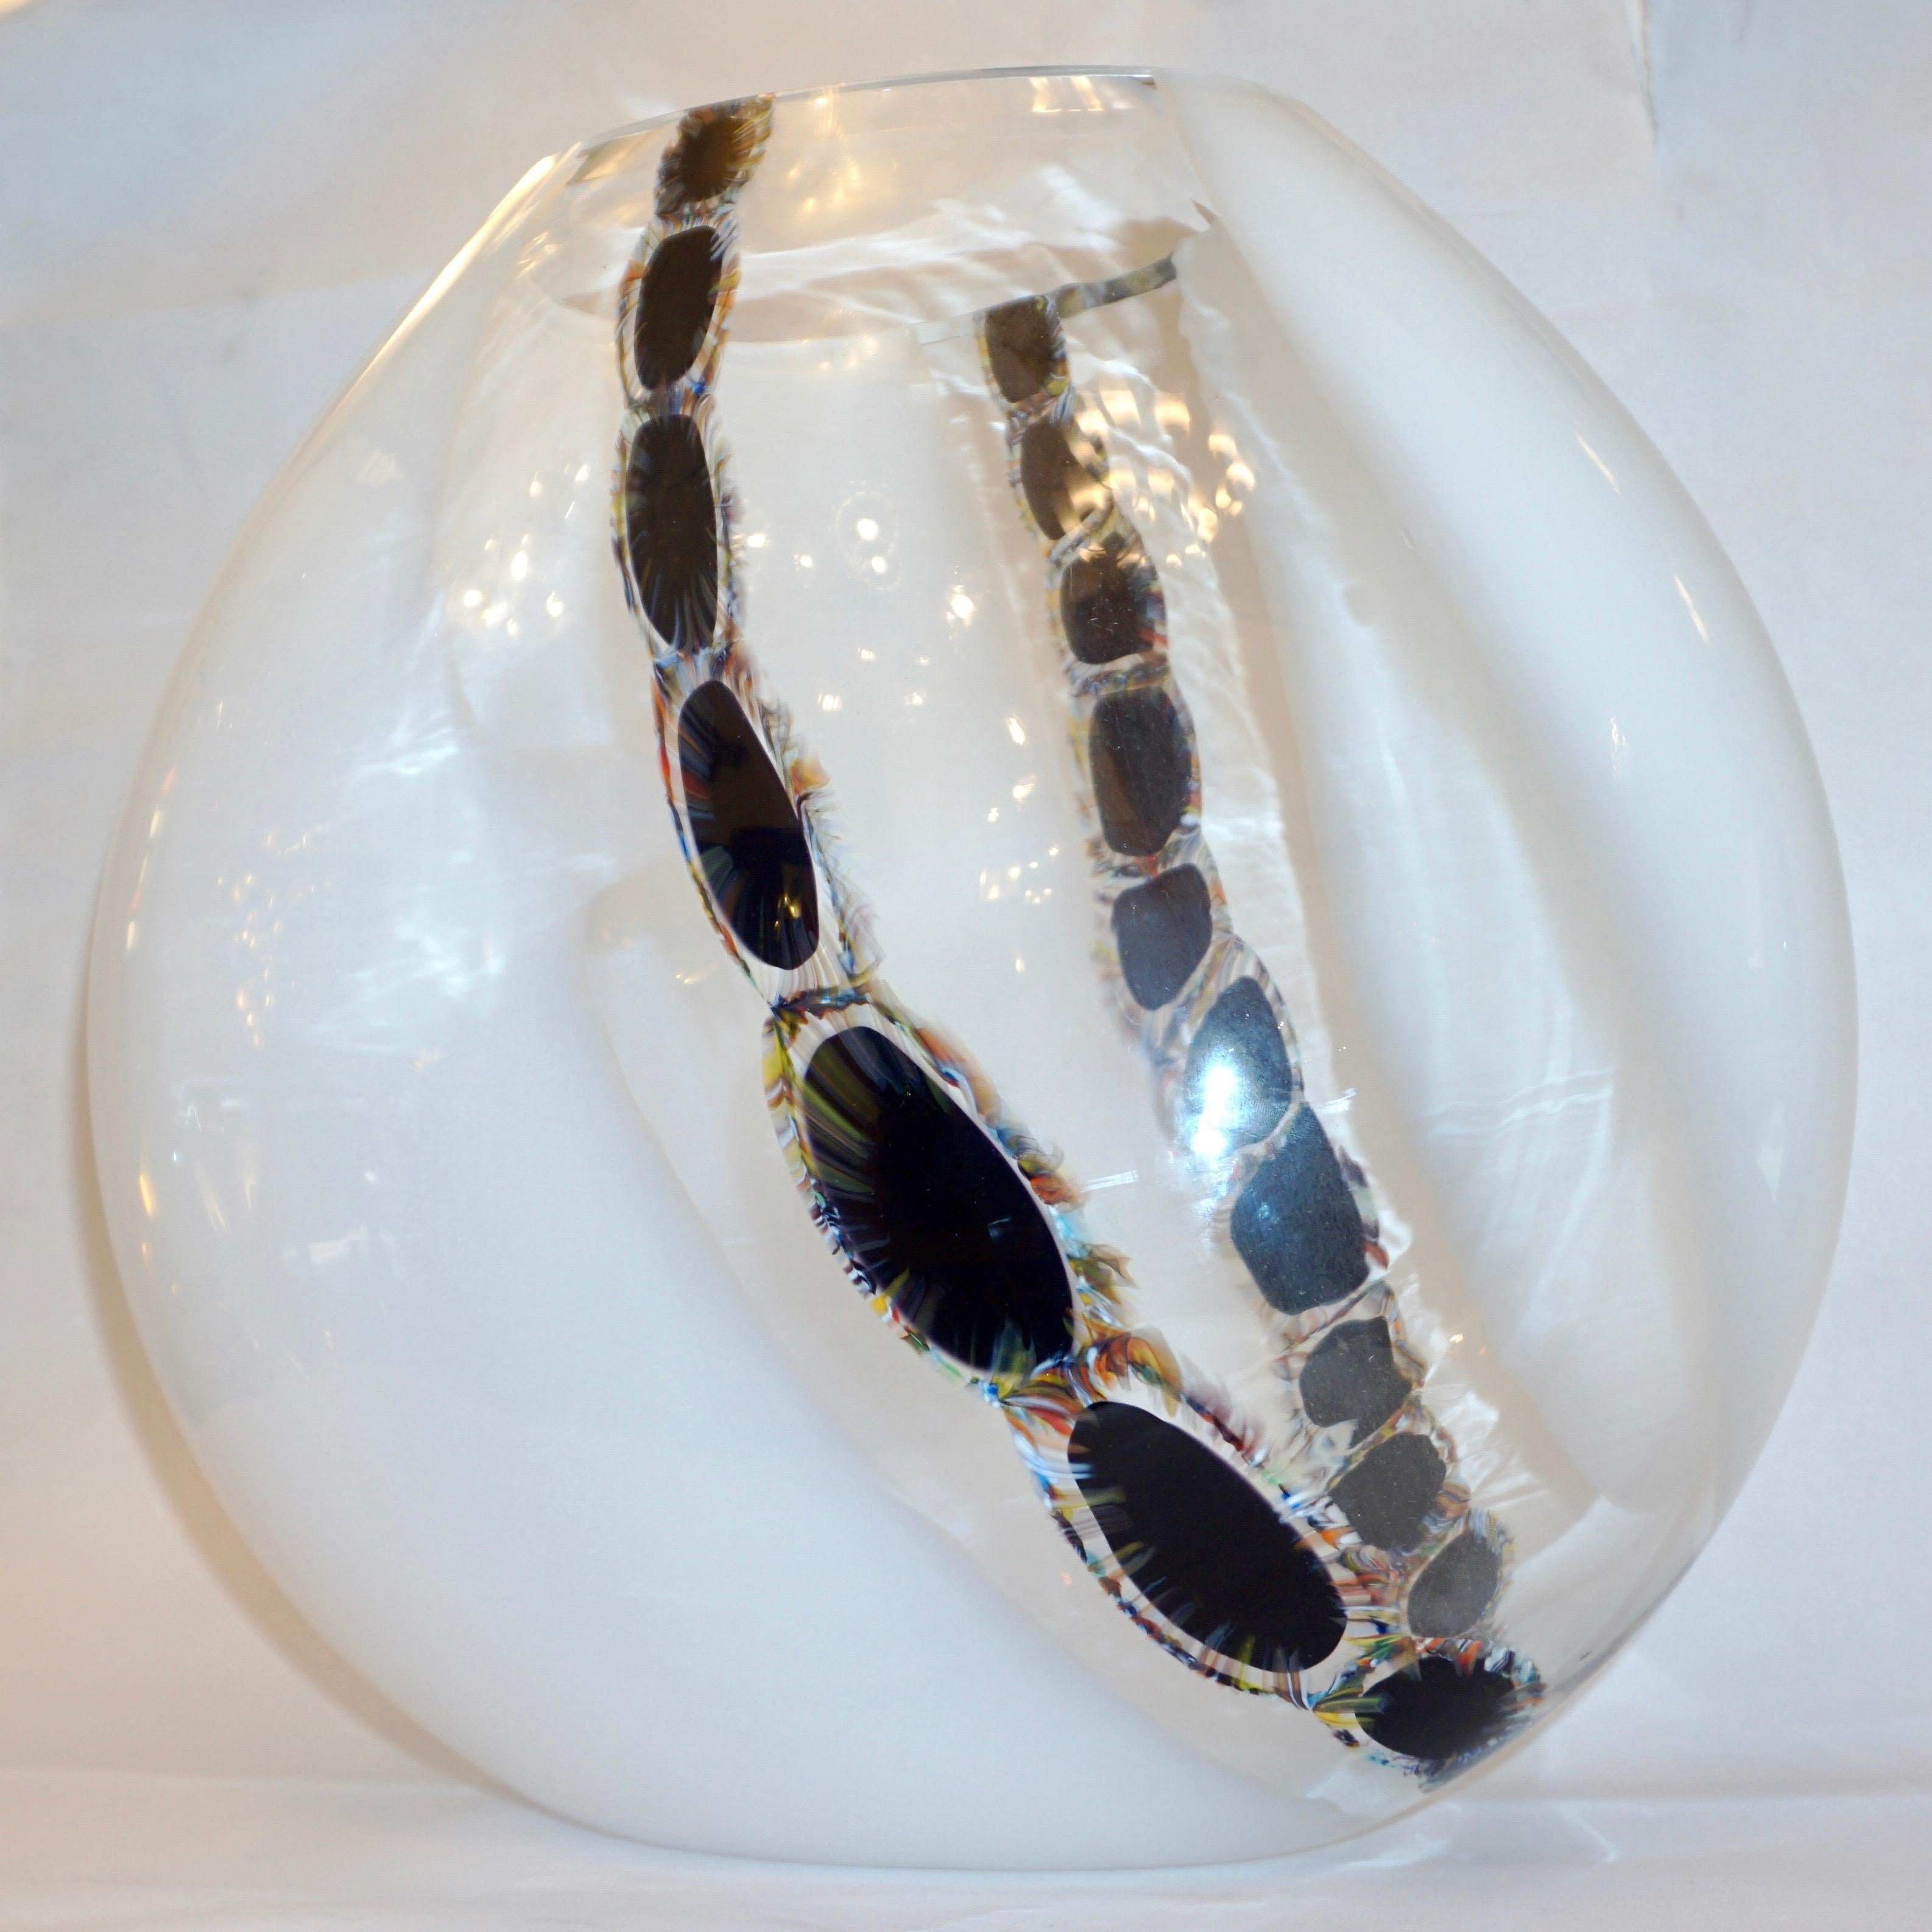 Italian very decorative modern design vase of organic oval shape in Venetian sommerso Murano glass, Work of Art blown with large panels of snow white glass captured inside the outer crystal clear layer, decorated inside with jewel-like black murrine